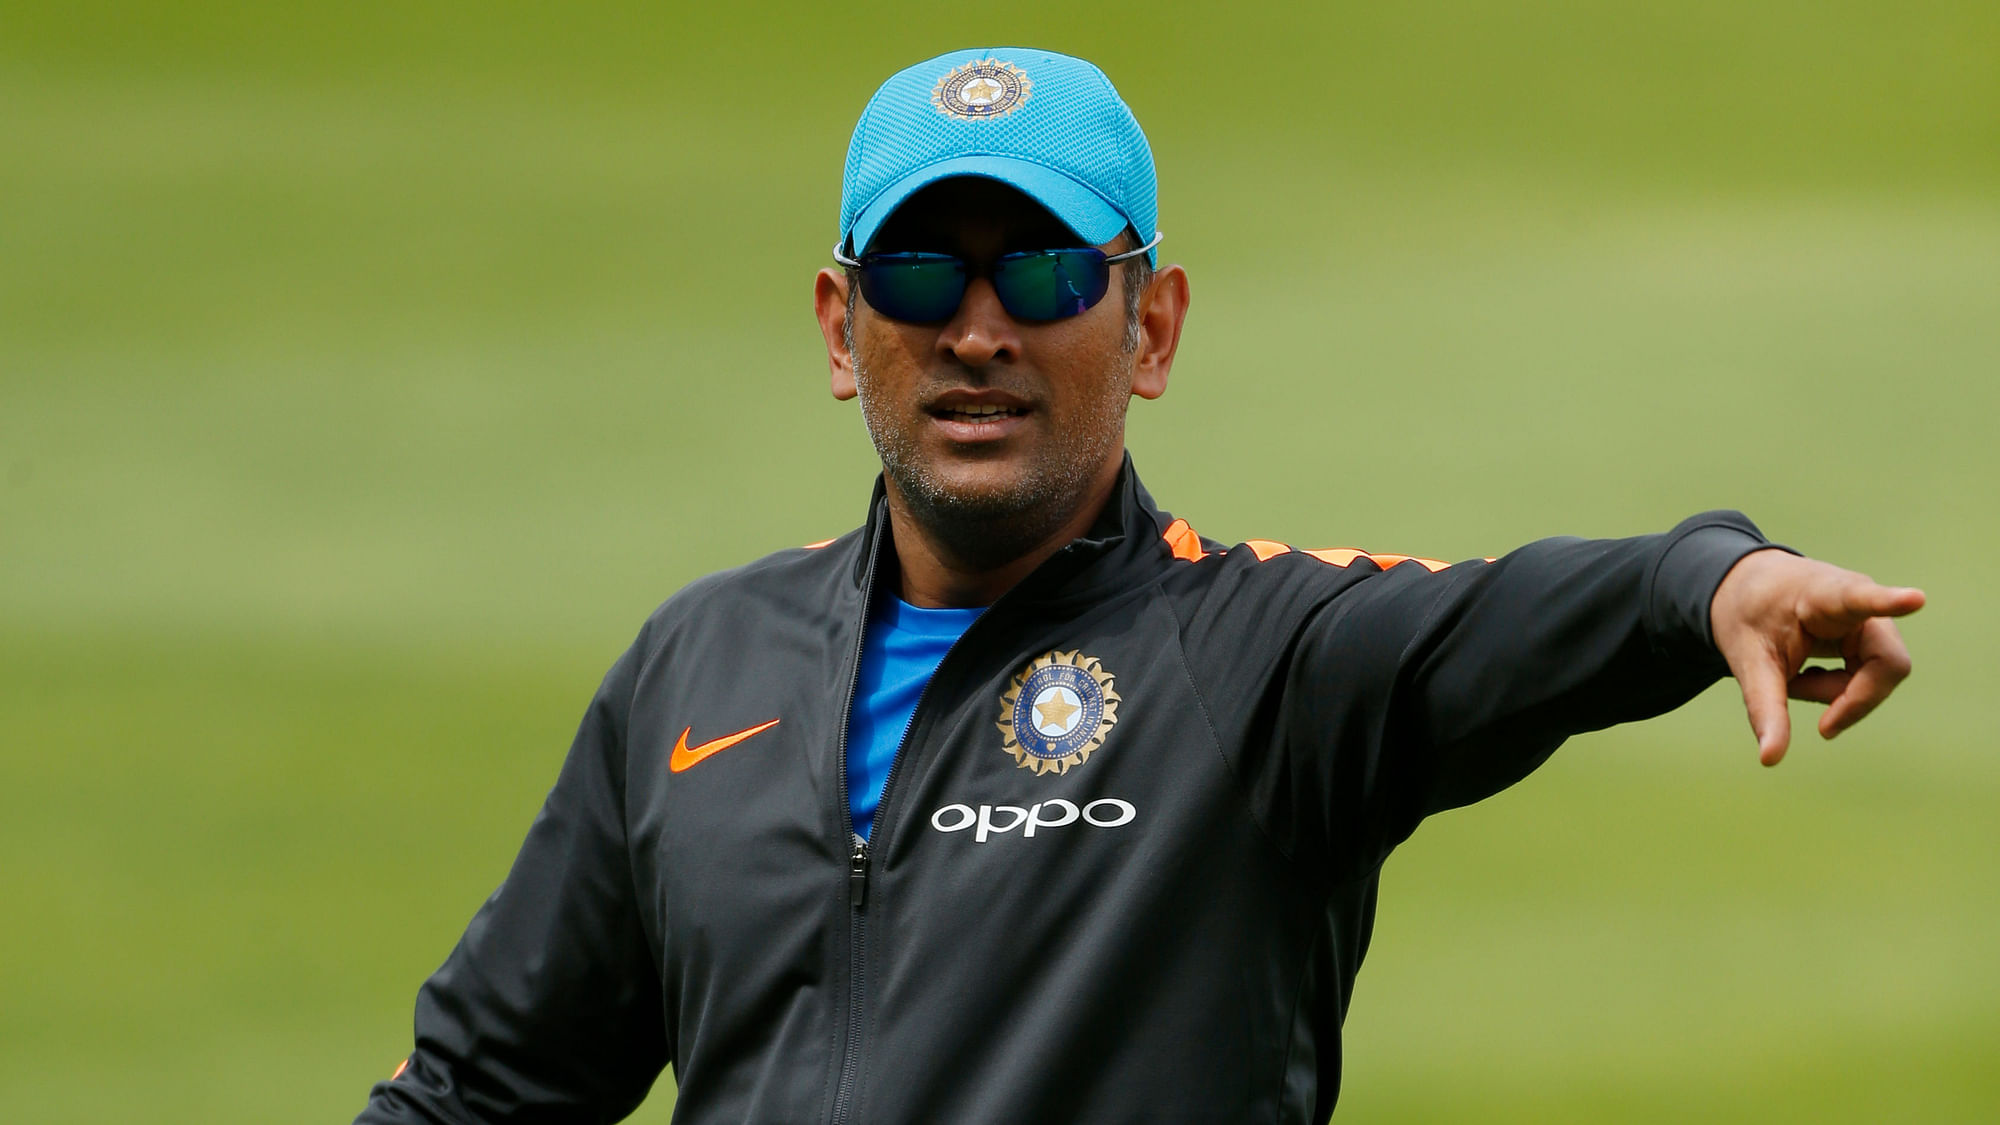 MS Dhoni has moved the Supreme Court seeking settlement with Amrapali. Apart from a penthouse apartment, Amrapali also owes him Rs 40 crore for endorsing the company between 2009 and 2016.